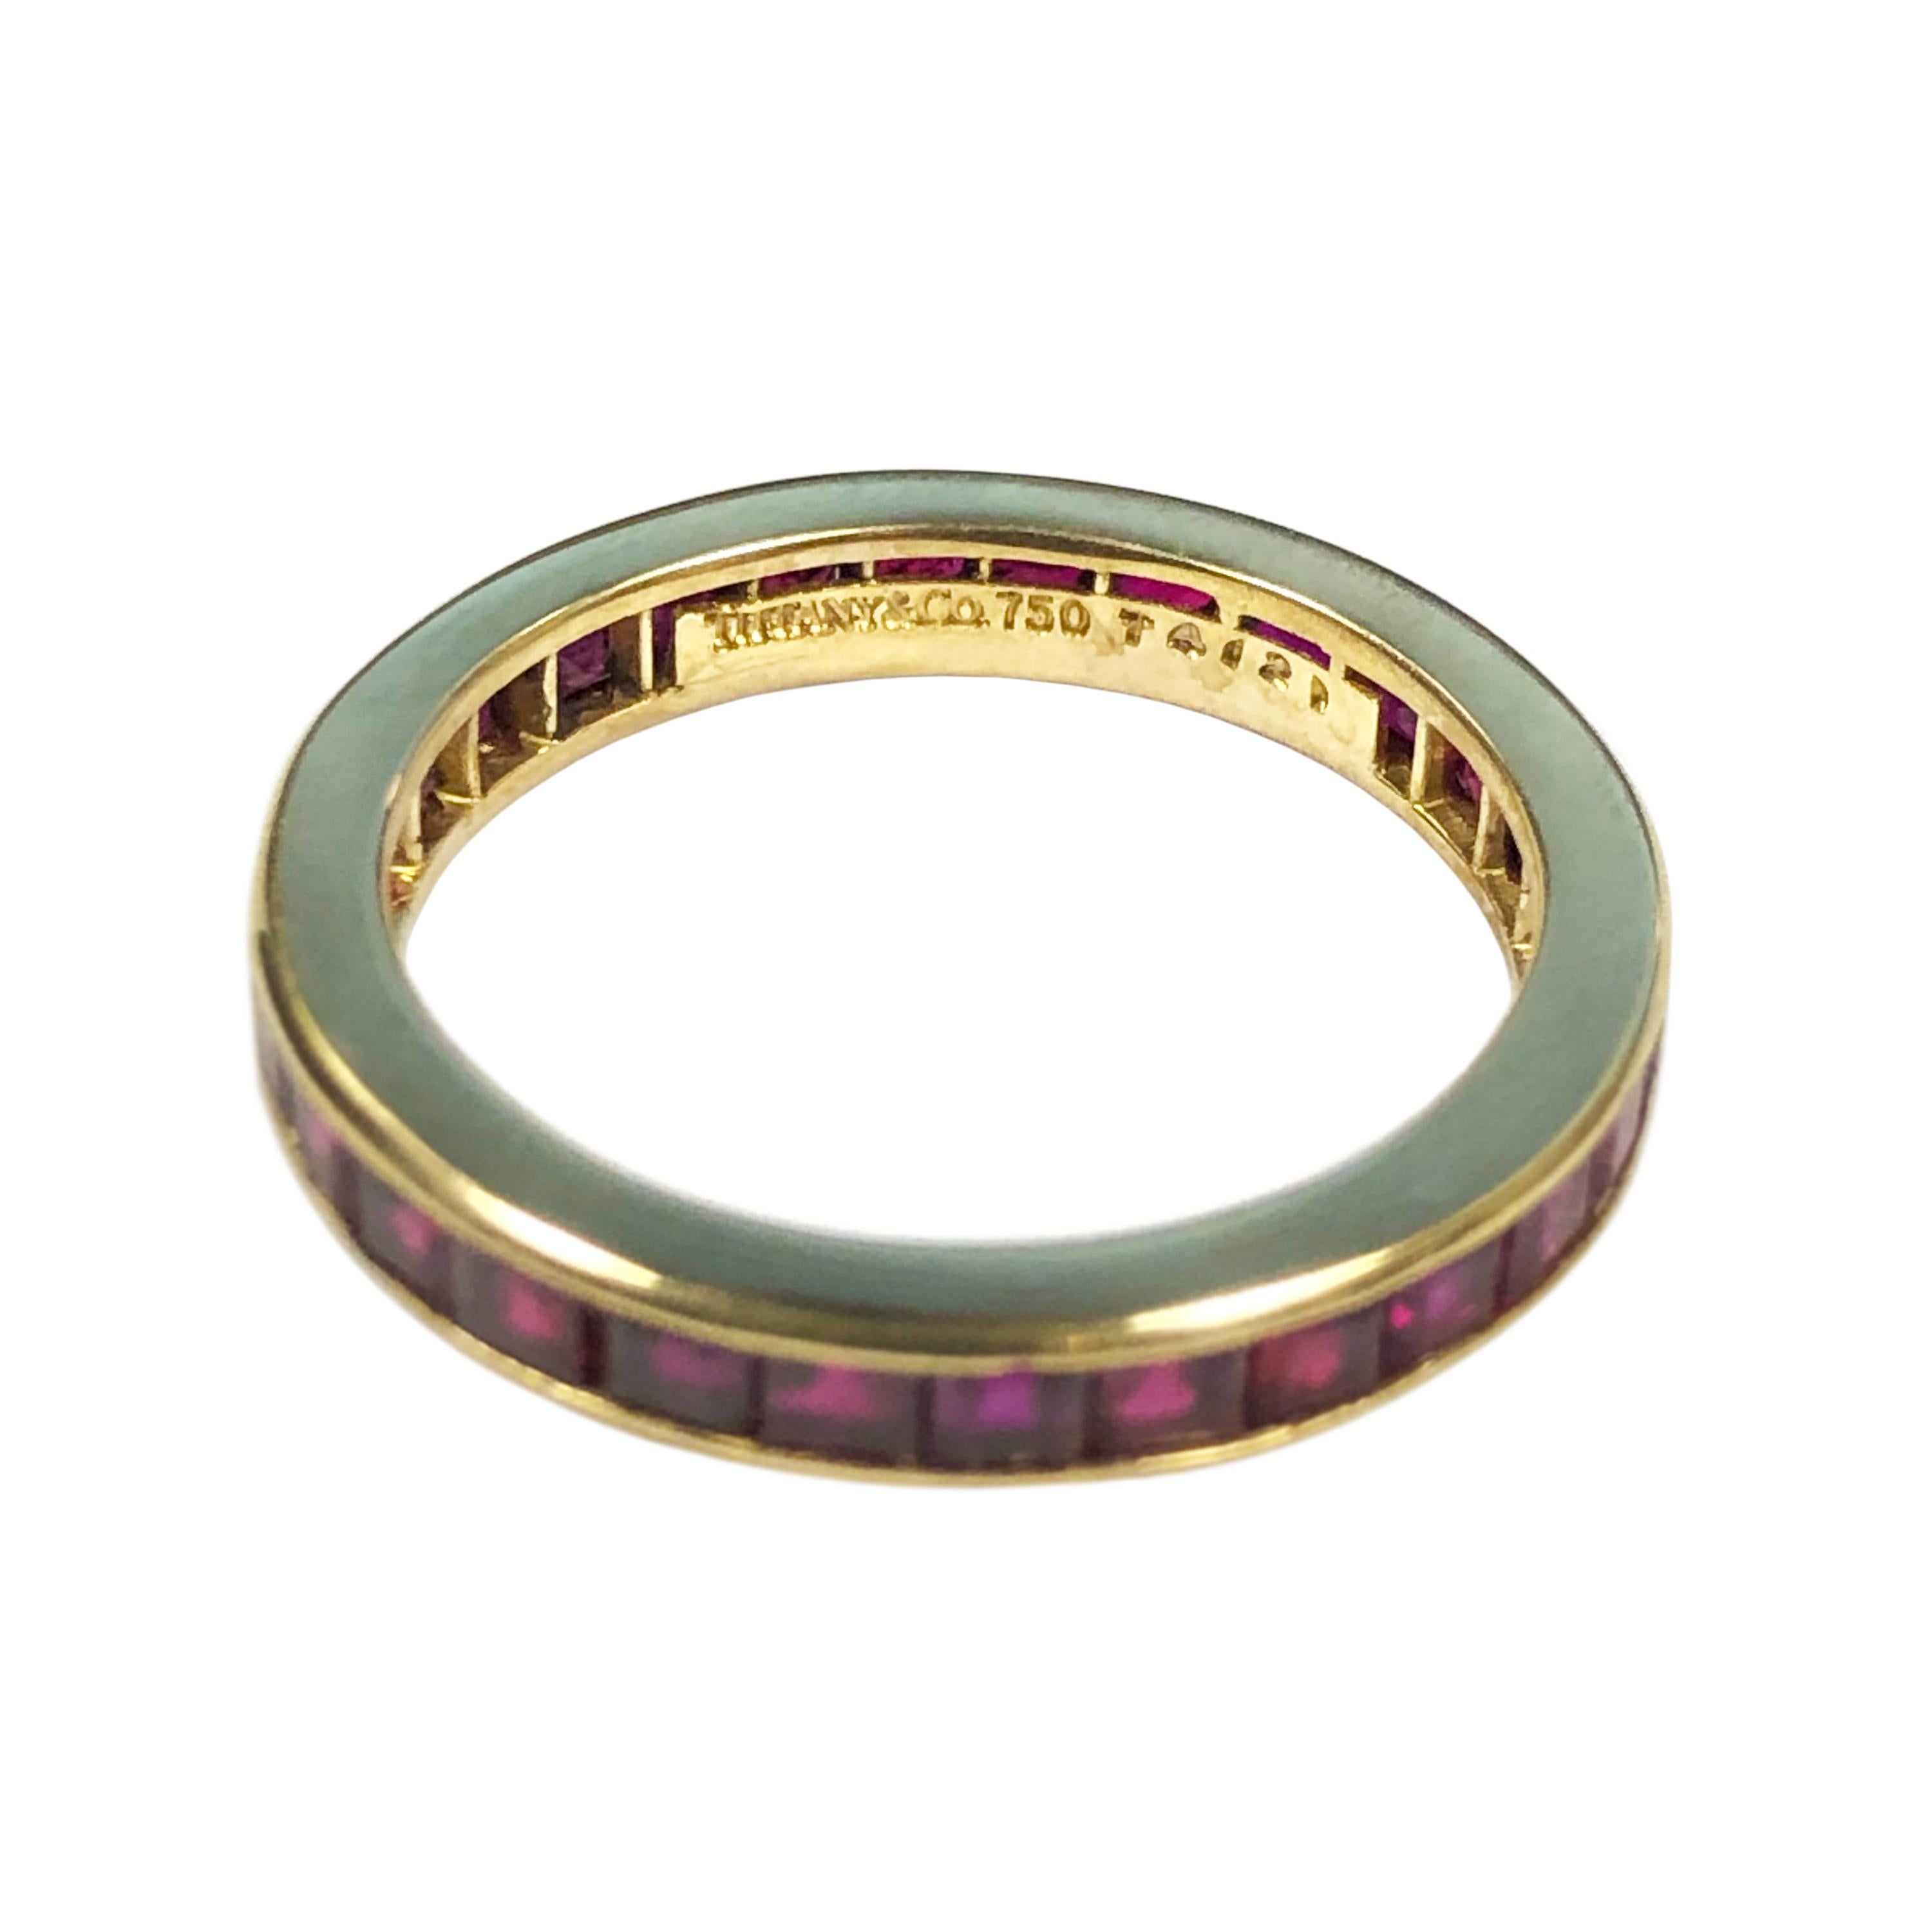 Circa 1990s Tiffany & Company 18K Yellow Gold Eternity Band Ring, set with Square cut Rubies of Fine Burma quality color and totaling approximately 1.50 carats. The ring measures 2.5 M.M. wide and is a finger size 7.  Comes in original Tiffany